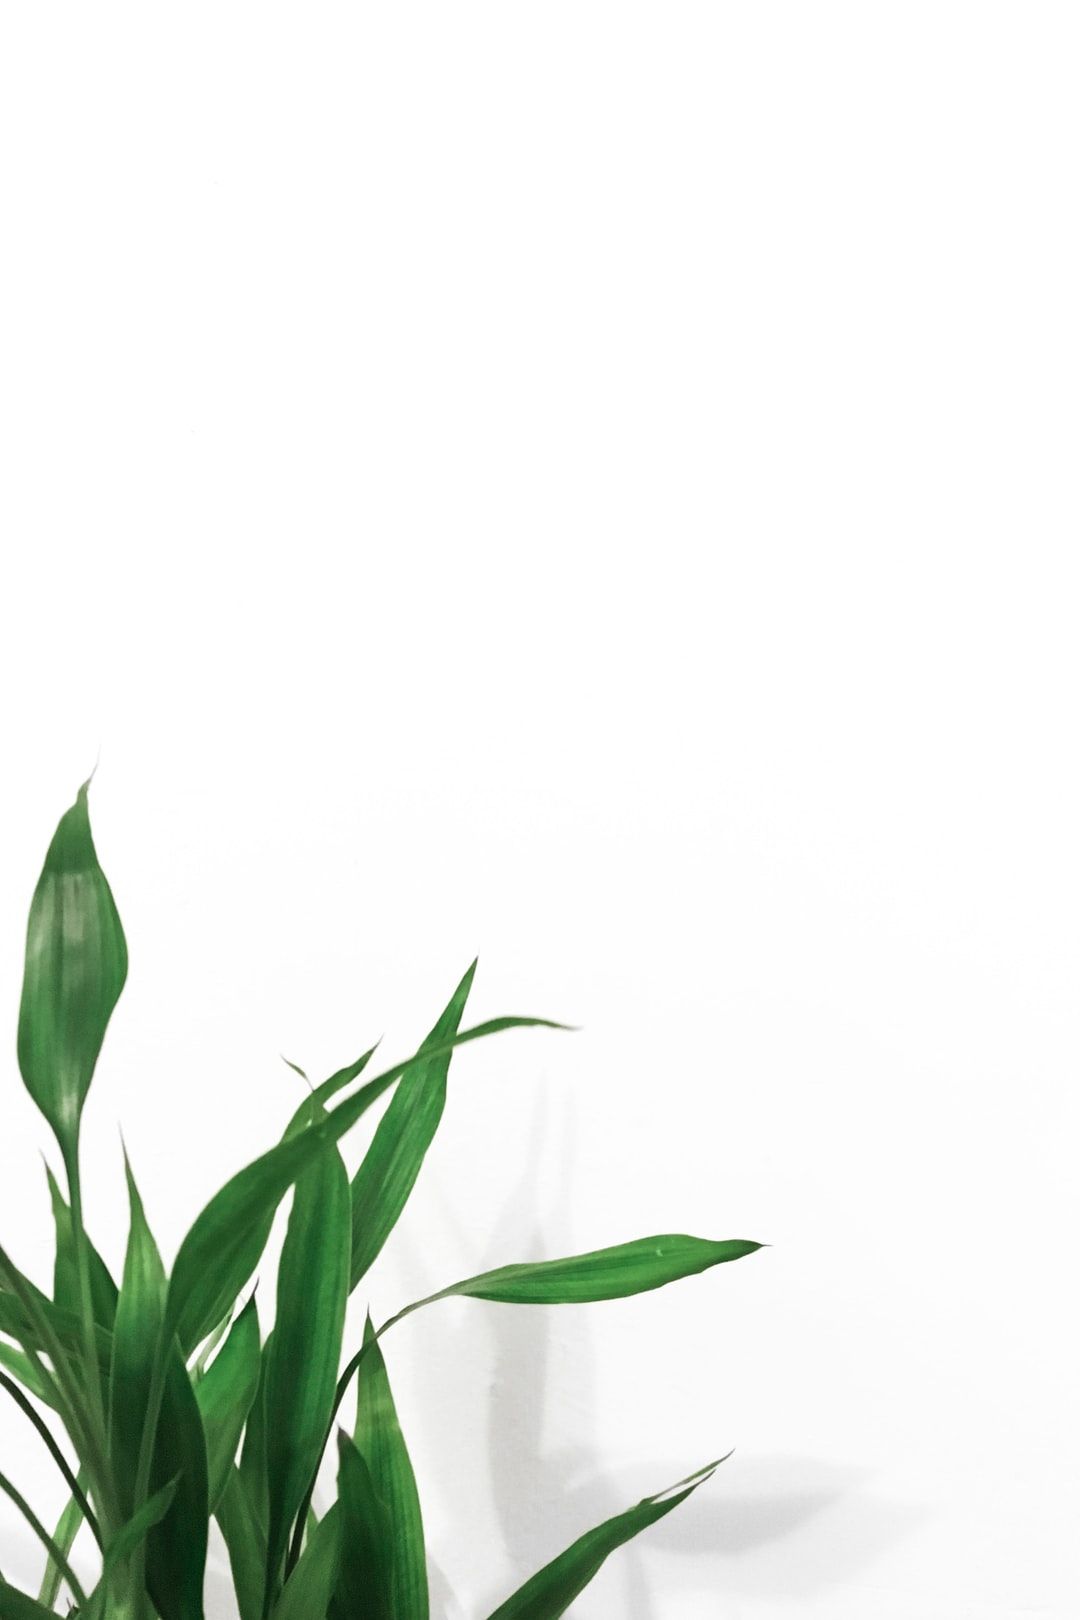 Plants with White Background best free background, white